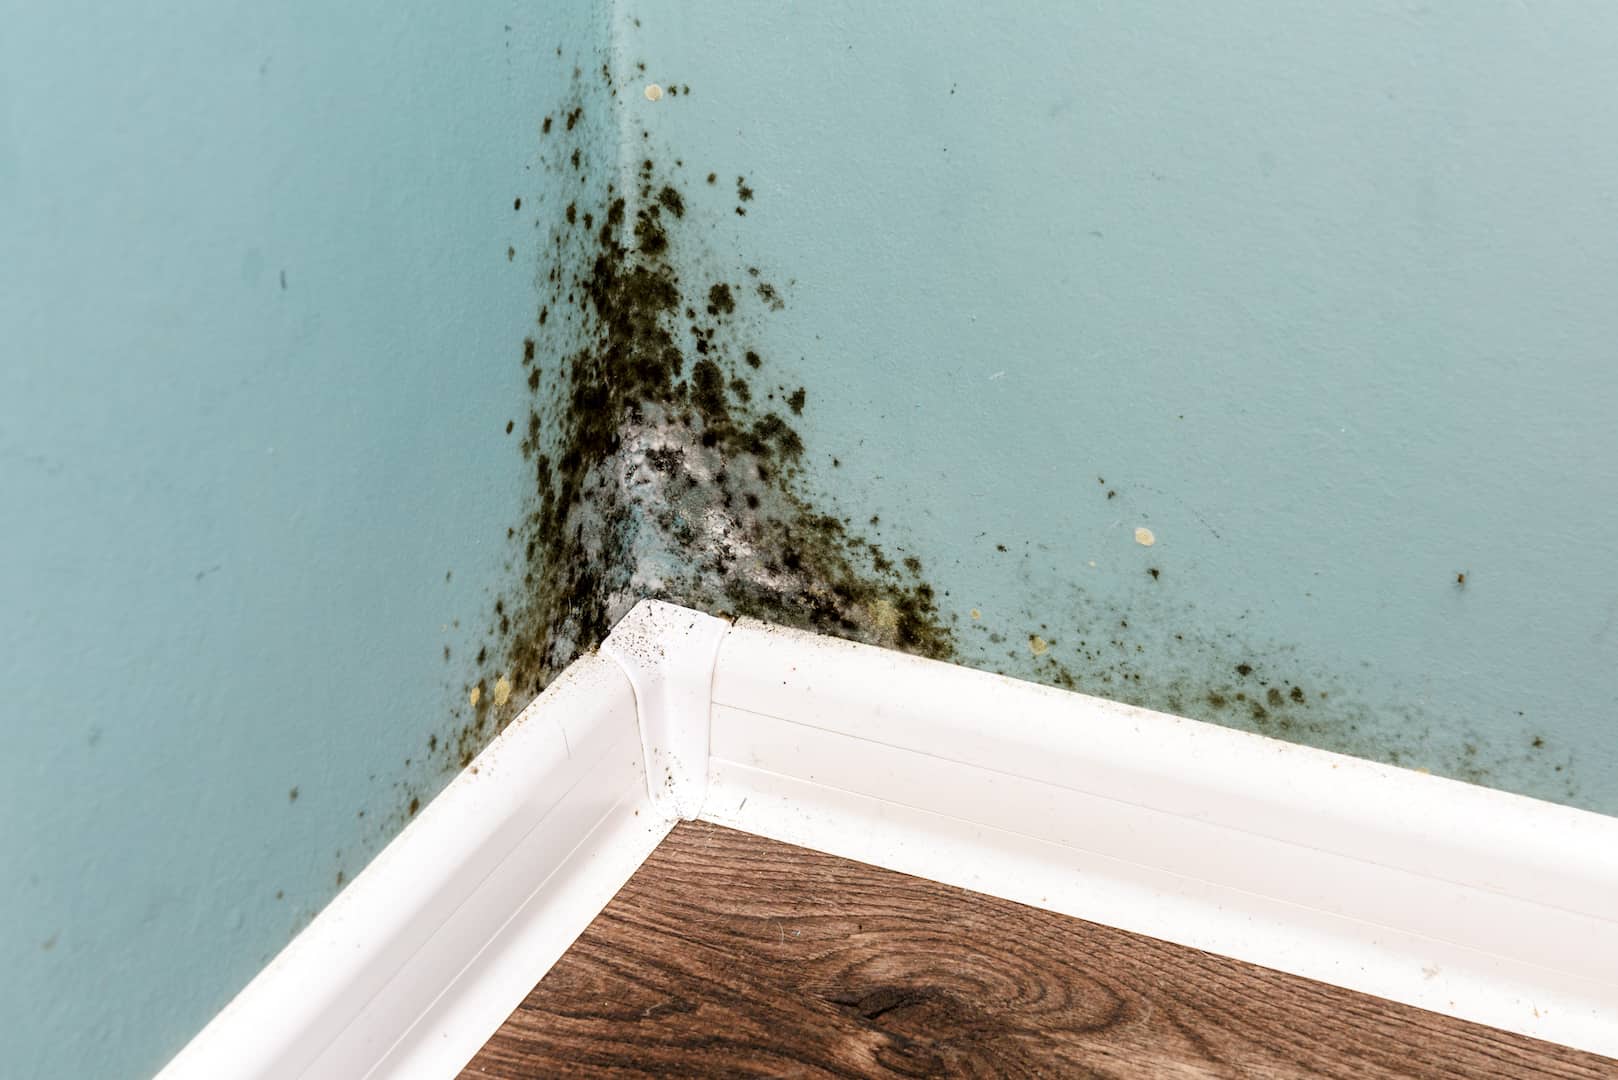 Mold growing up wall in the corner of a room.